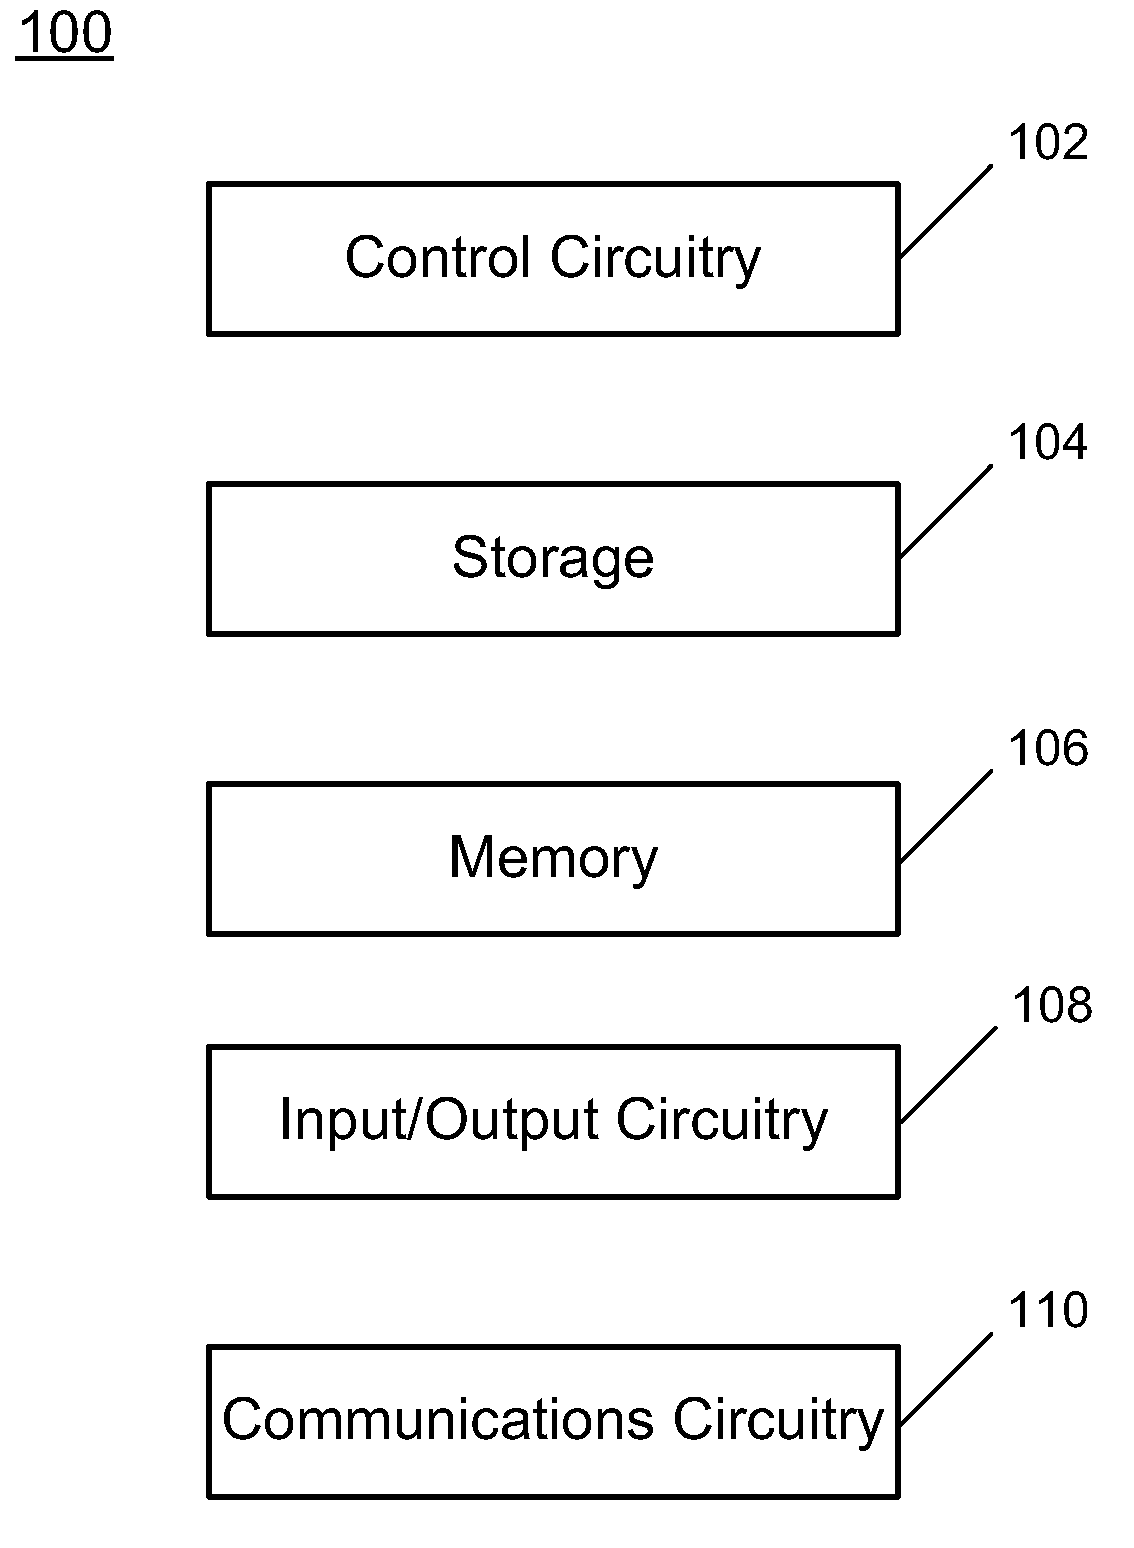 Systems and methods for providing a virtual fashion closet